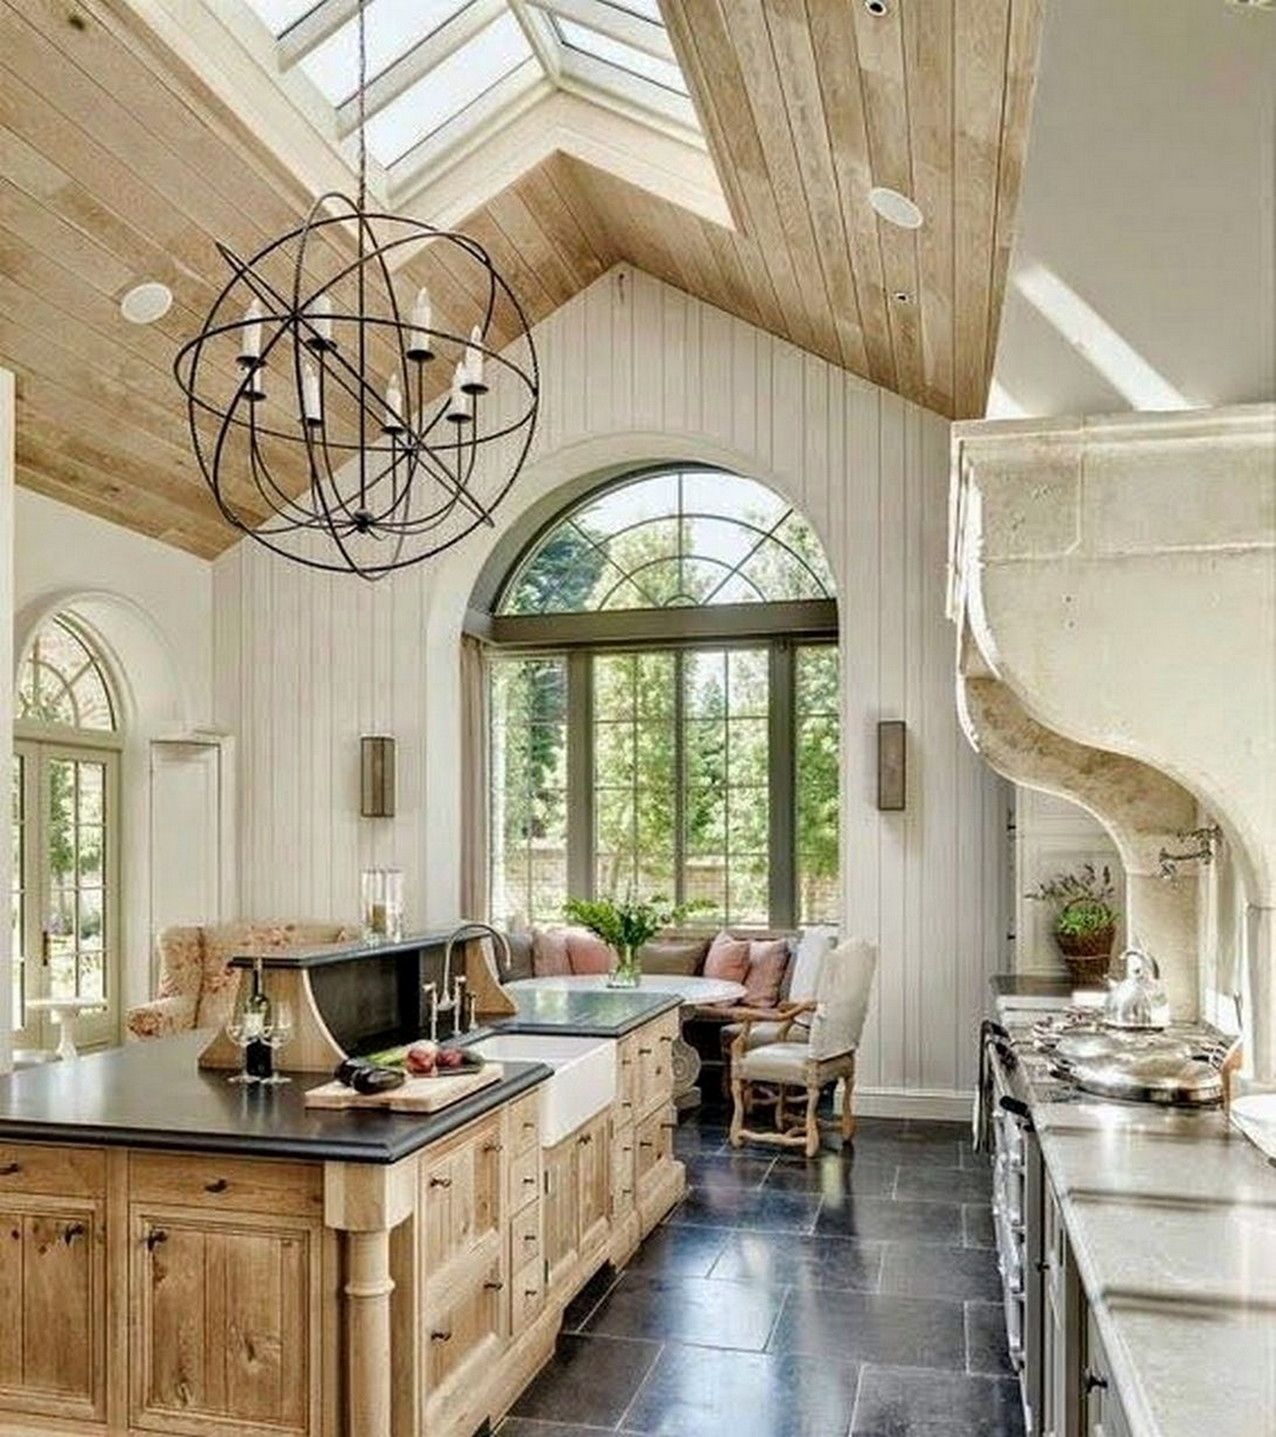 French Country Kitchen From Yourcityresource